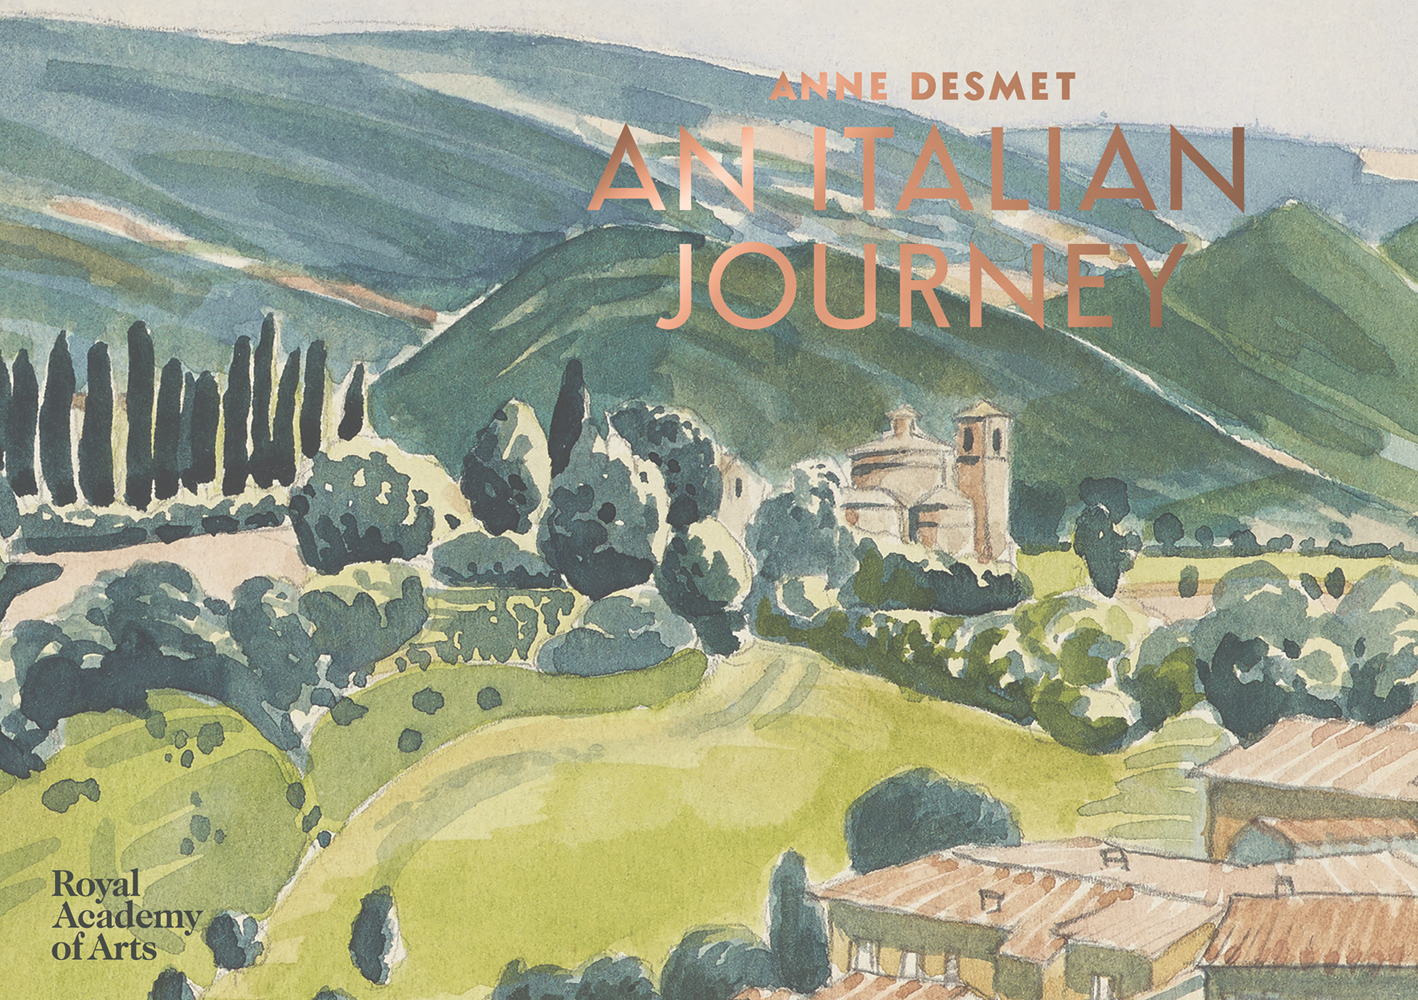 Watercolour of Italian landscape with green mountains and cypress trees, 'ANNE DESMET, AN ITALIAN JOURNEY', in gold font above, by Royal Academy.